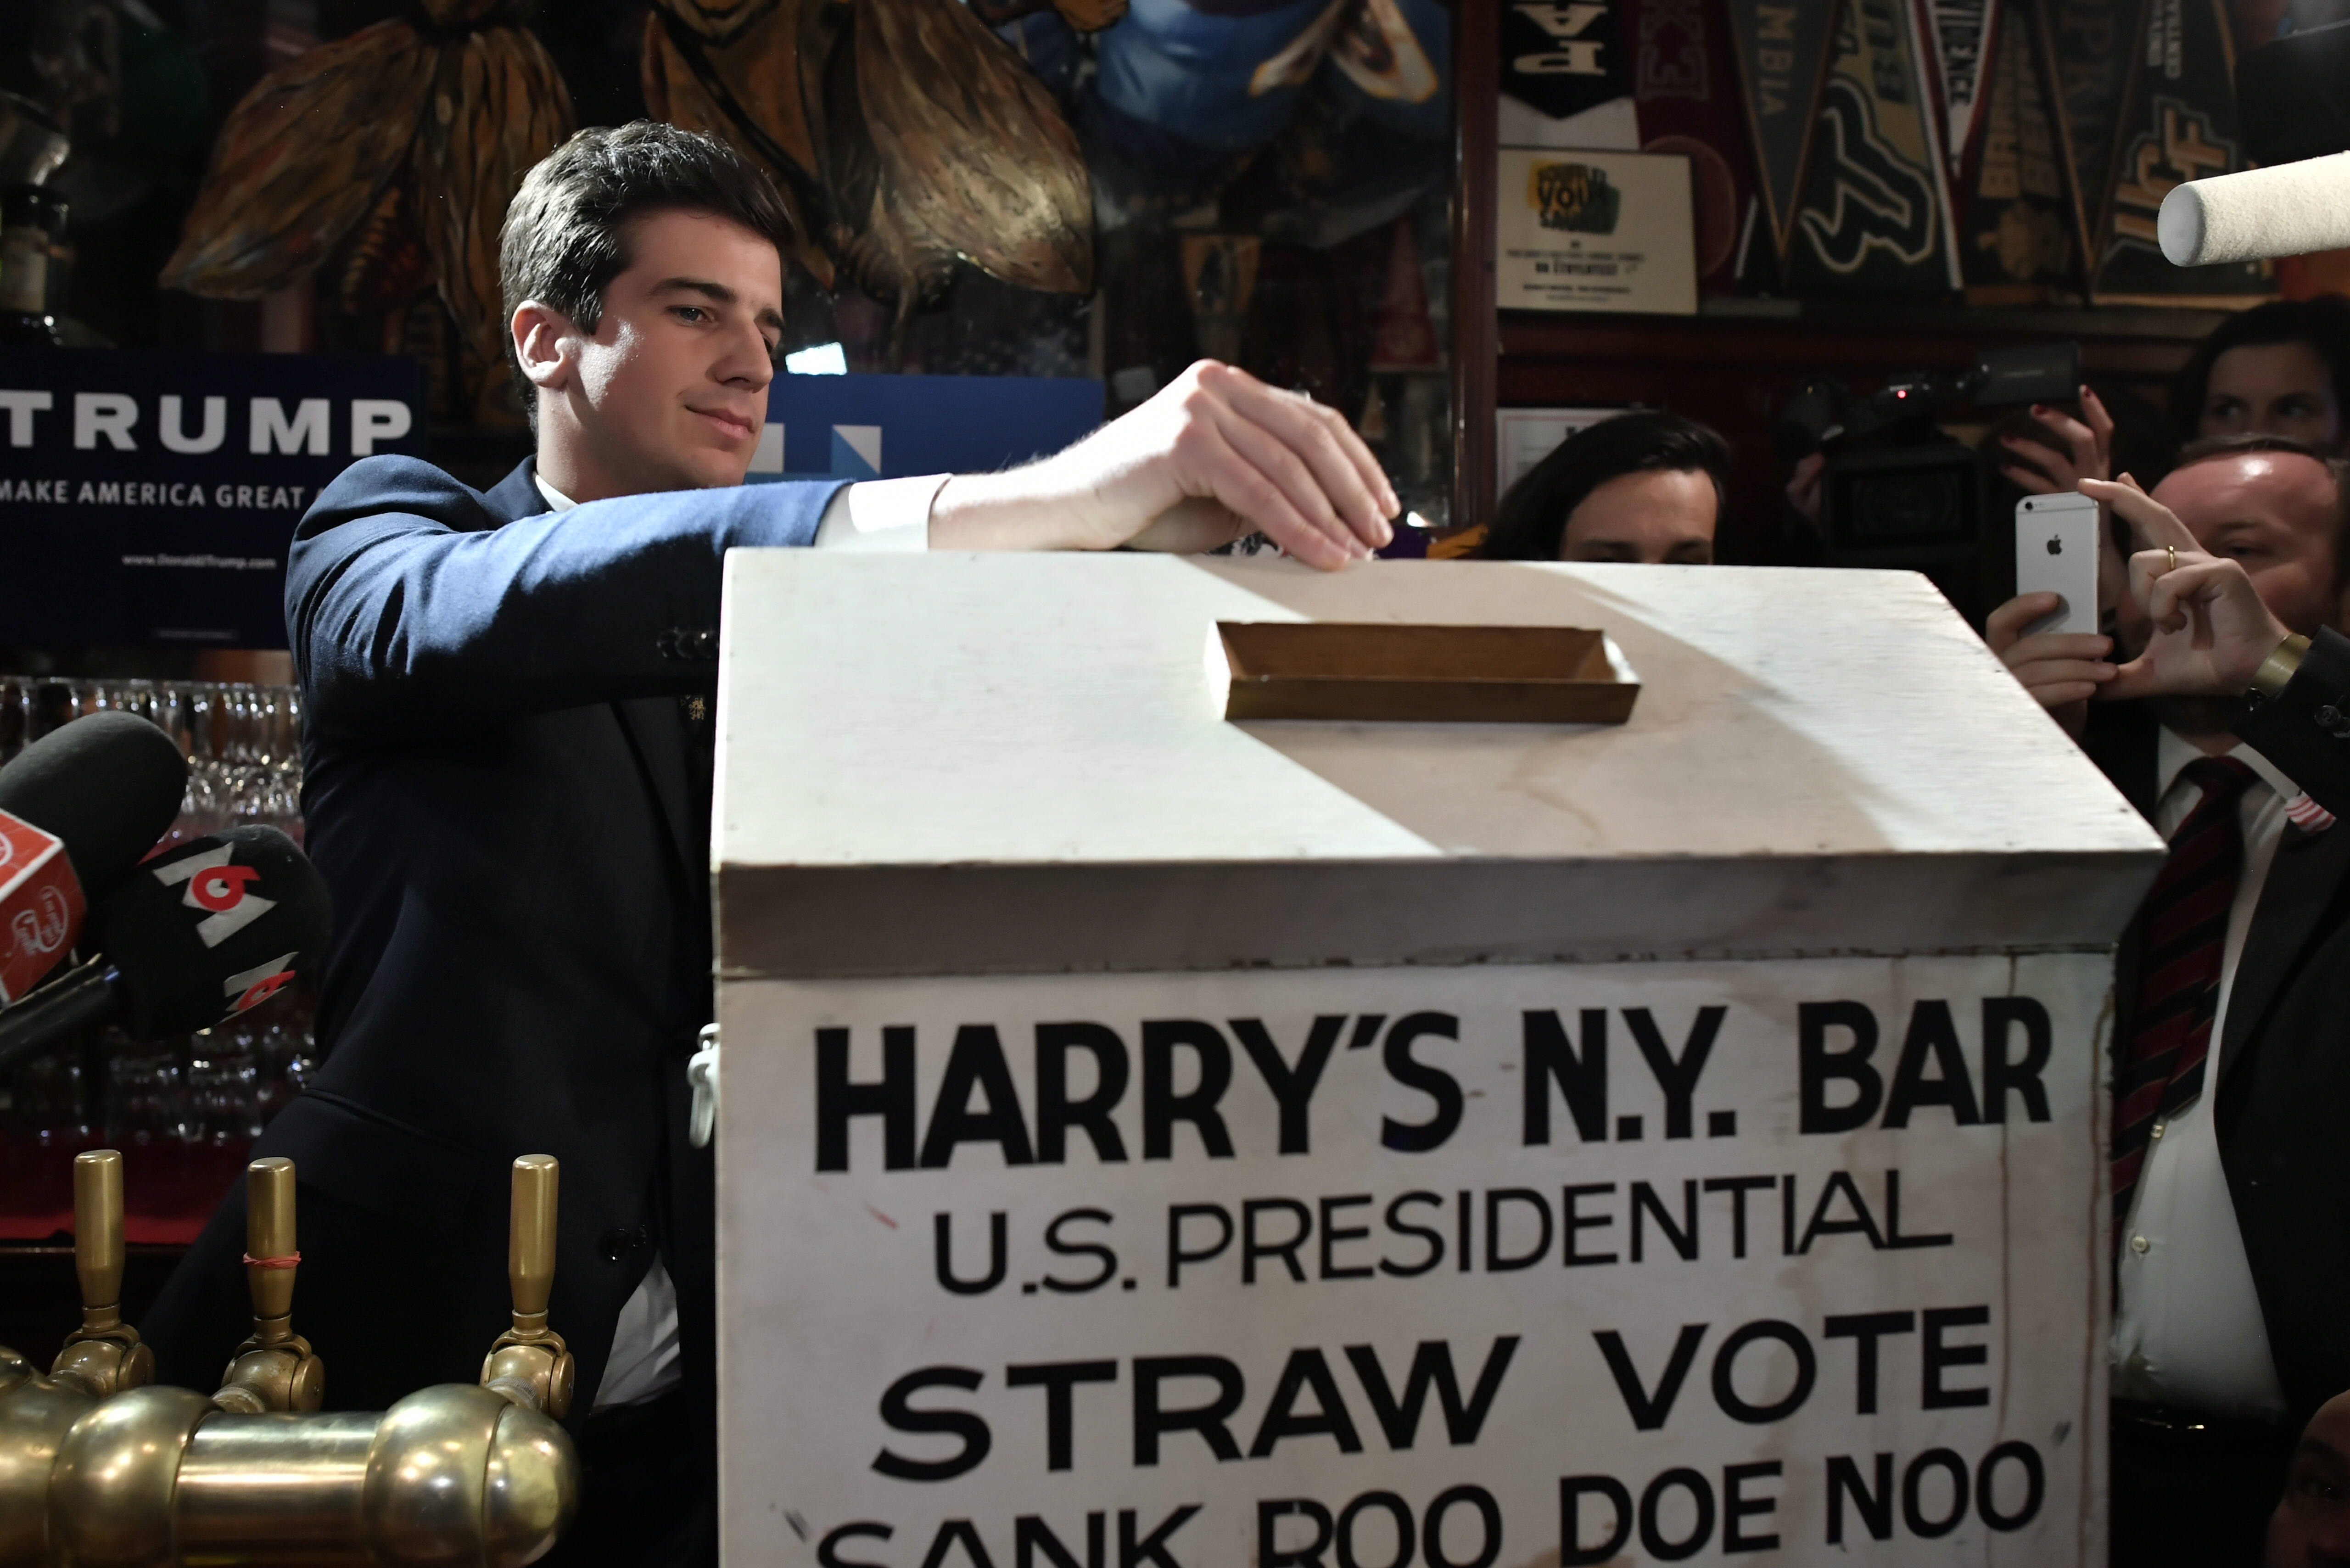 A bartender opens a ballot box at Harry's New York Bar in Paris late on November 8, 2016 during  a straw poll on election night. Expatriate Americans monitor the US election returns at Harry's New York Bar in Paris, which prides itself on having correctly predicted the outcome of US elections all but twice since launching its traditional "straw poll" in 1924. / AFP PHOTO / PHILIPPE LOPEZ